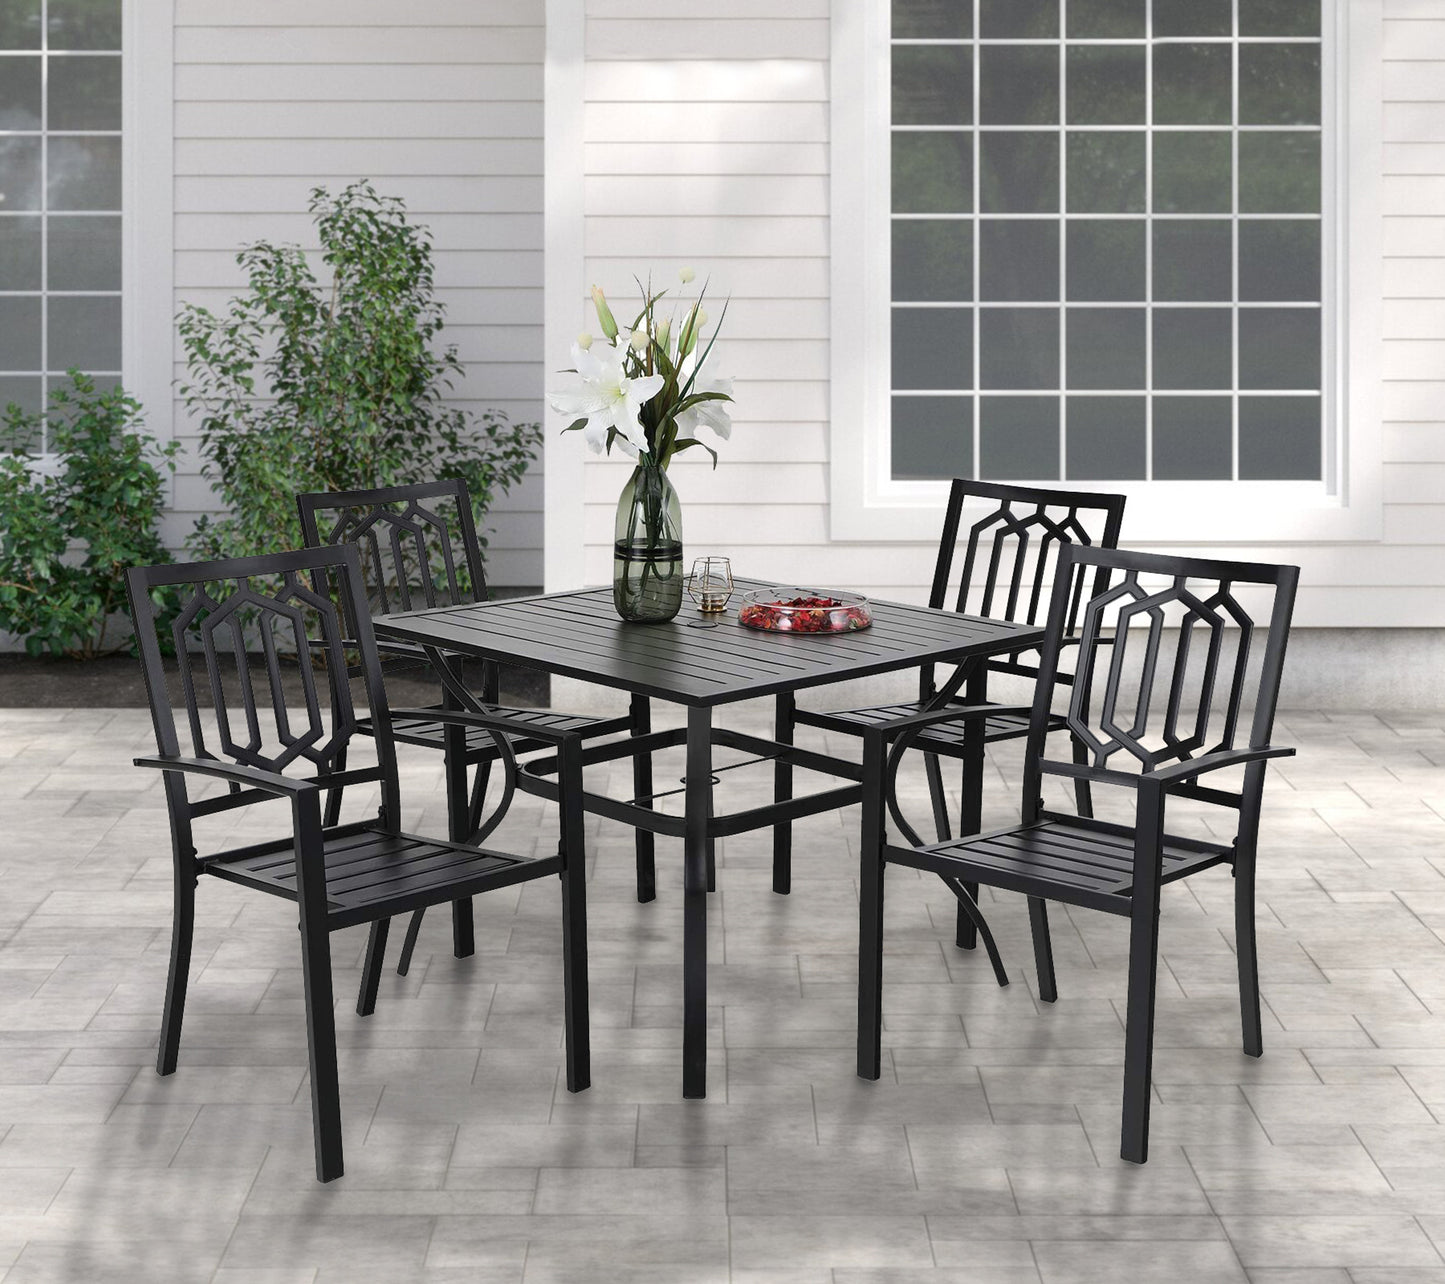 Sophia & William 5 Pcs Metal Patio Dining Set Outdoor Stackable Chairs and 37 Square Table, Black